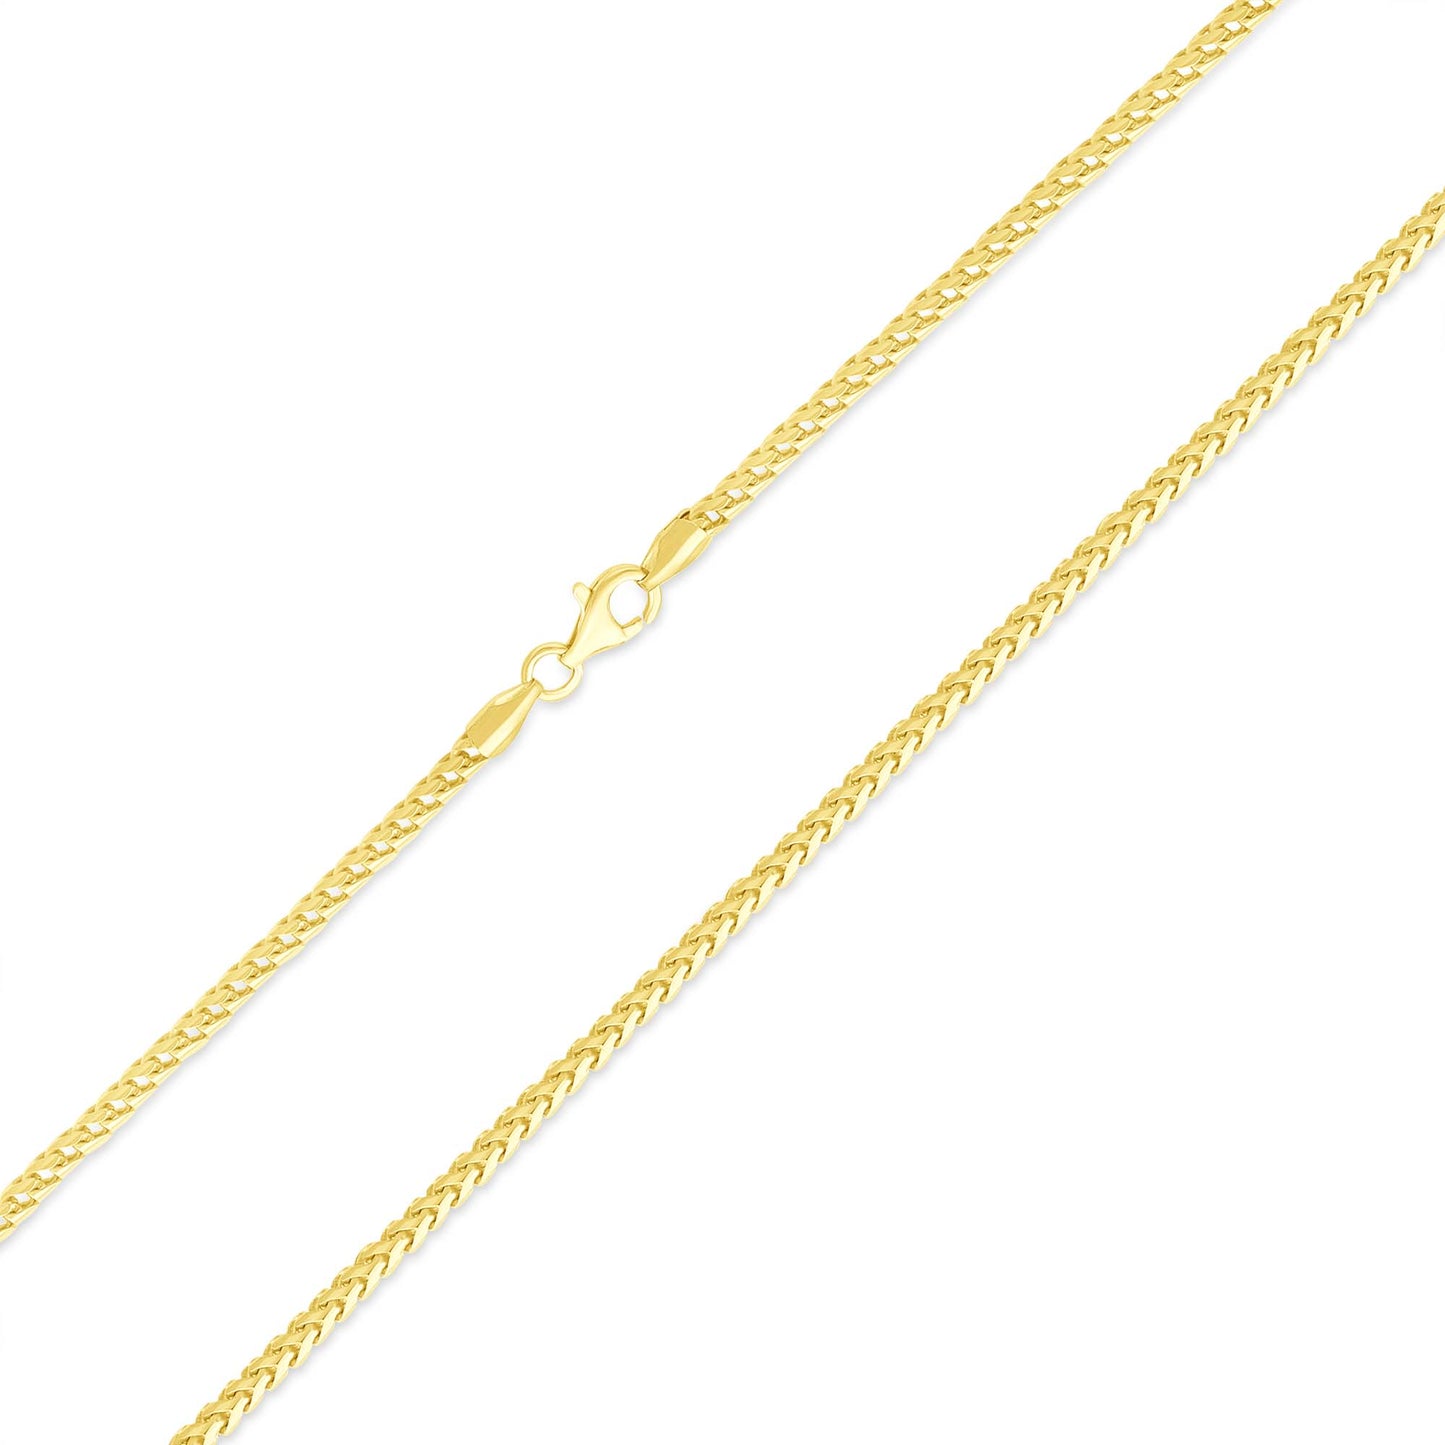 Silver 925 Gold Plated Franco 030 Chain 2.5 mm. FRANCO080G